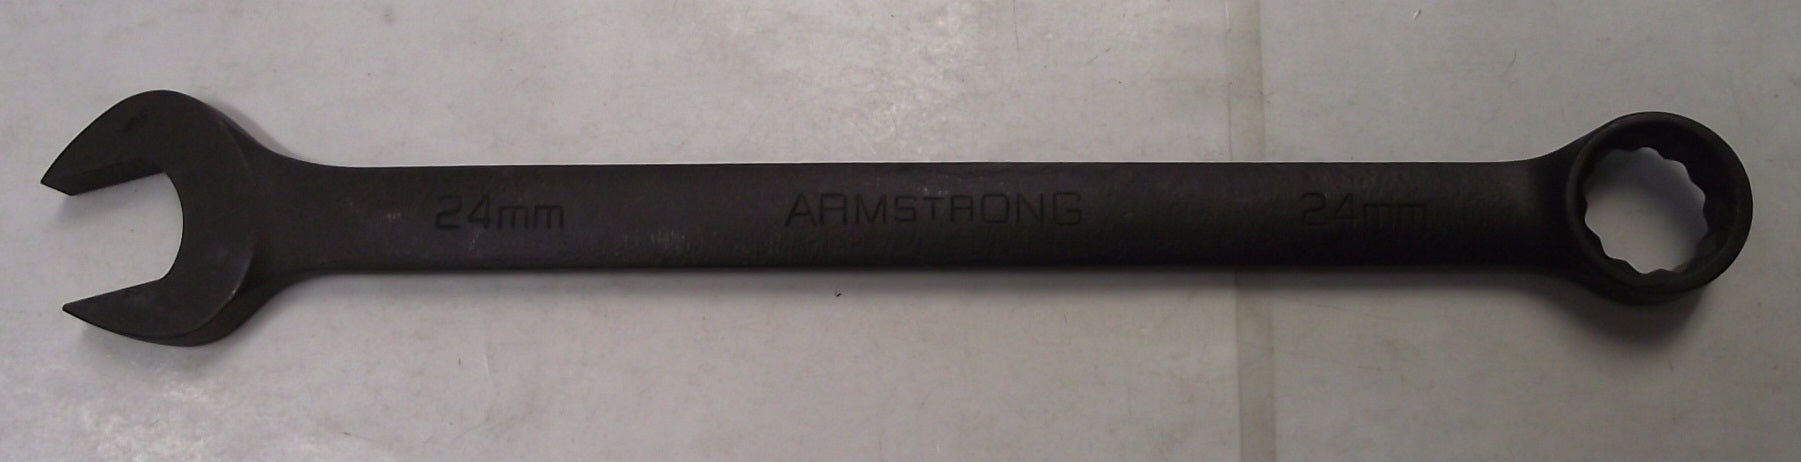 Armstrong 56-224 24mm 12 Point Metric Black Oxide Long Combination Wrench USA